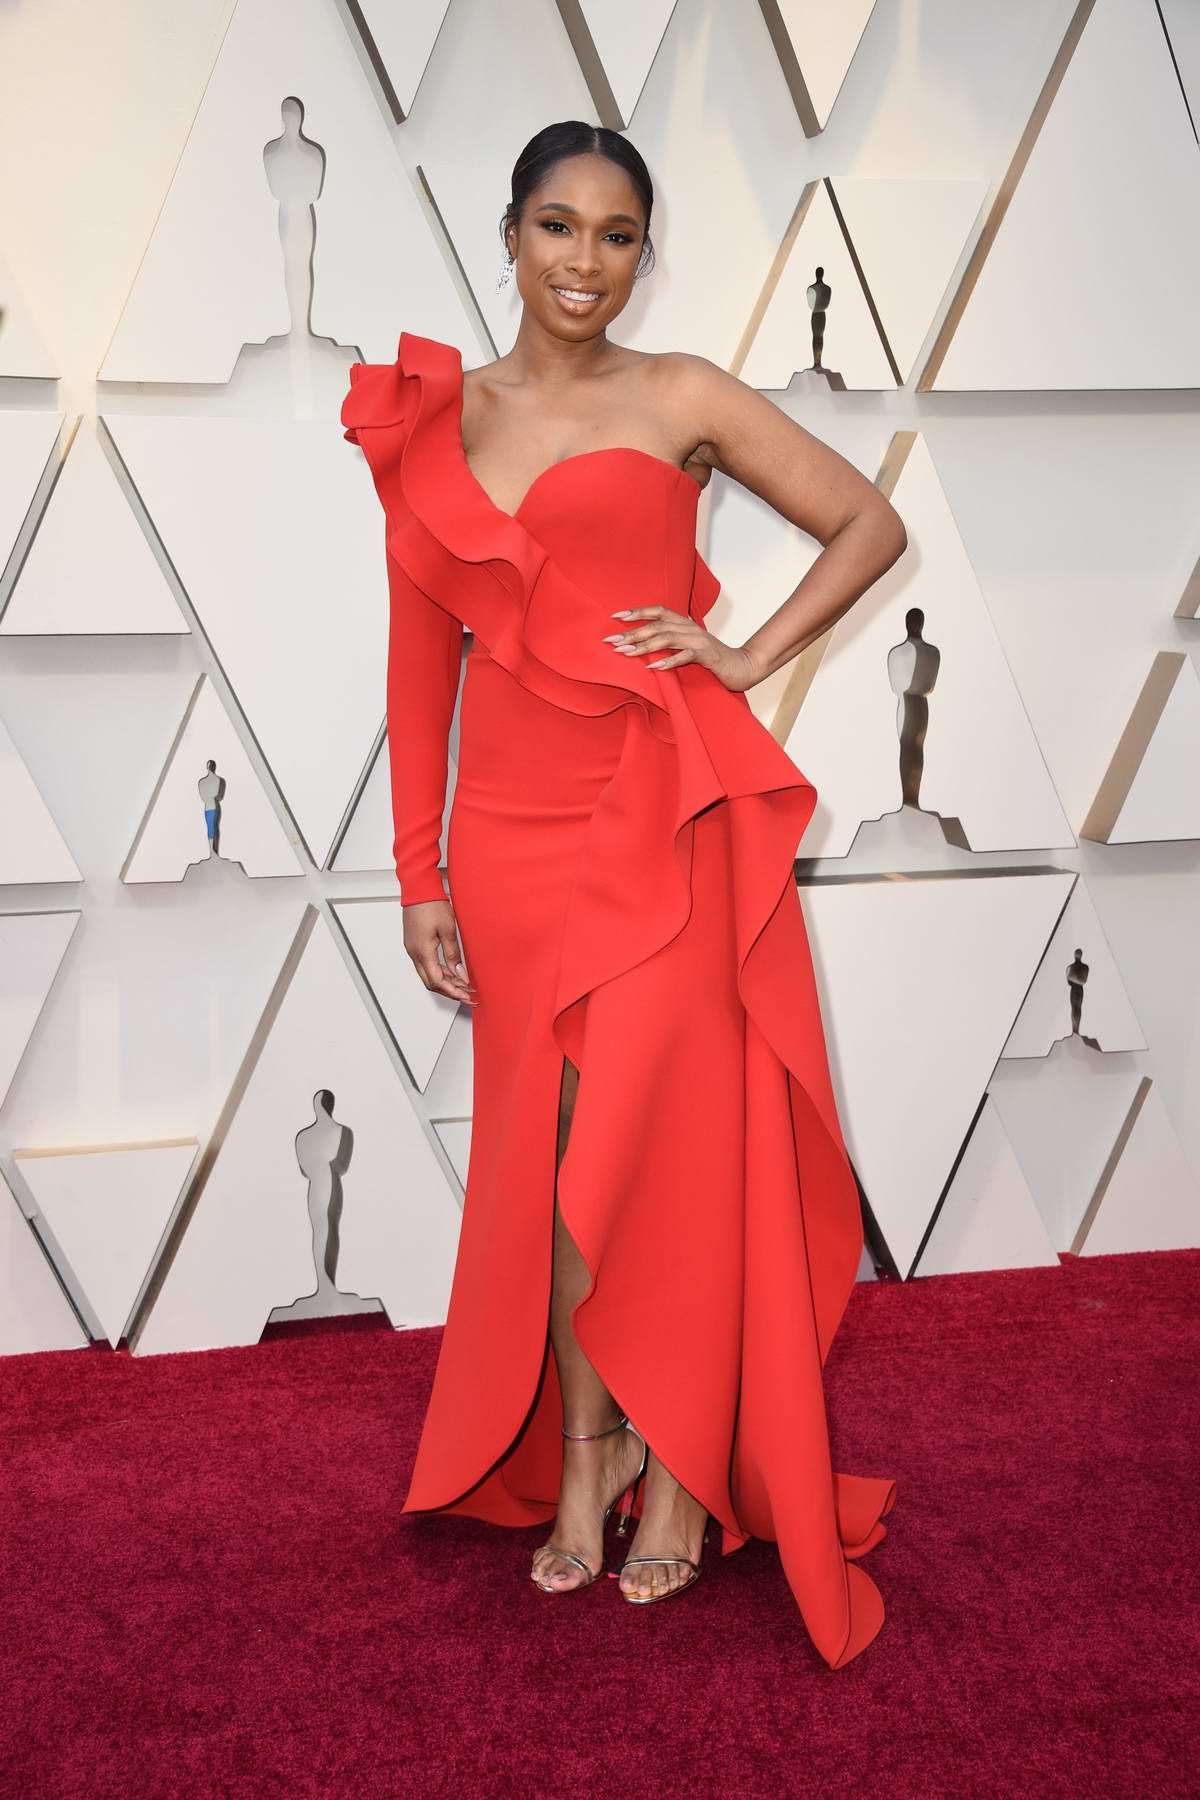 Jennifer Hudson wearing a coral colored dress and putting her hand on her hip at the Oscars.